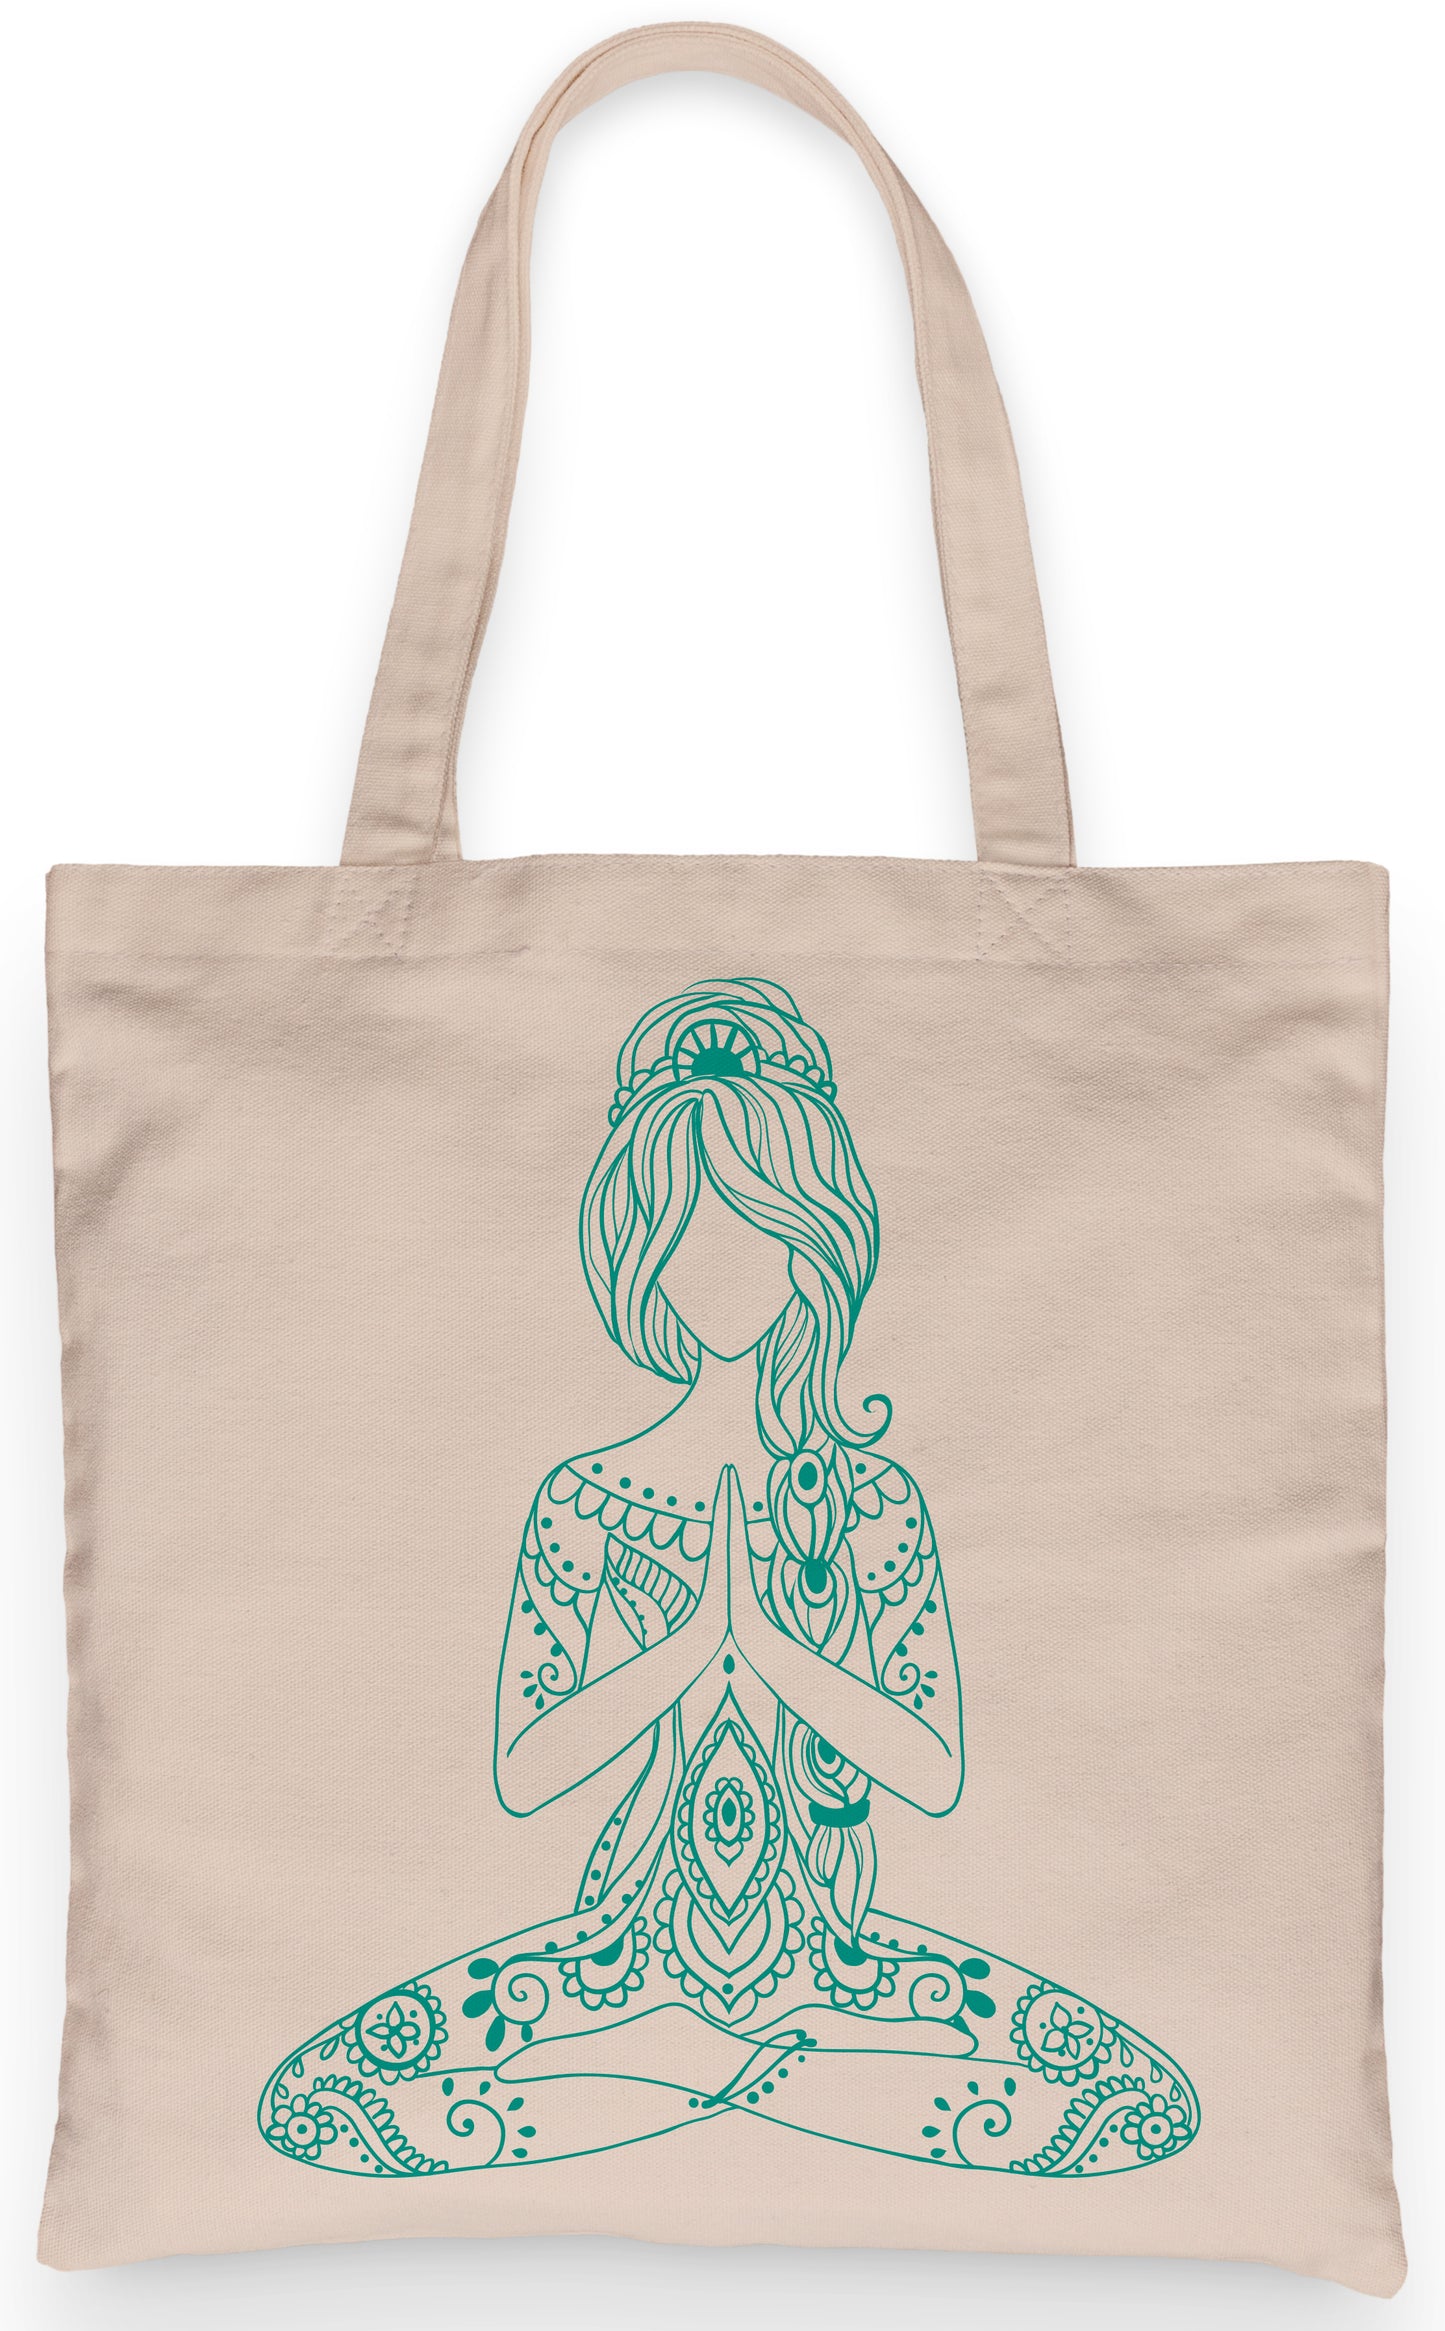 Yoga Namaste Tote 100% Cotton Fun Grocery Tote, Book Tote, Office Tote. Premium Cotton Canvas 15.5" by 19.5 " with 5" Gusset on bottom